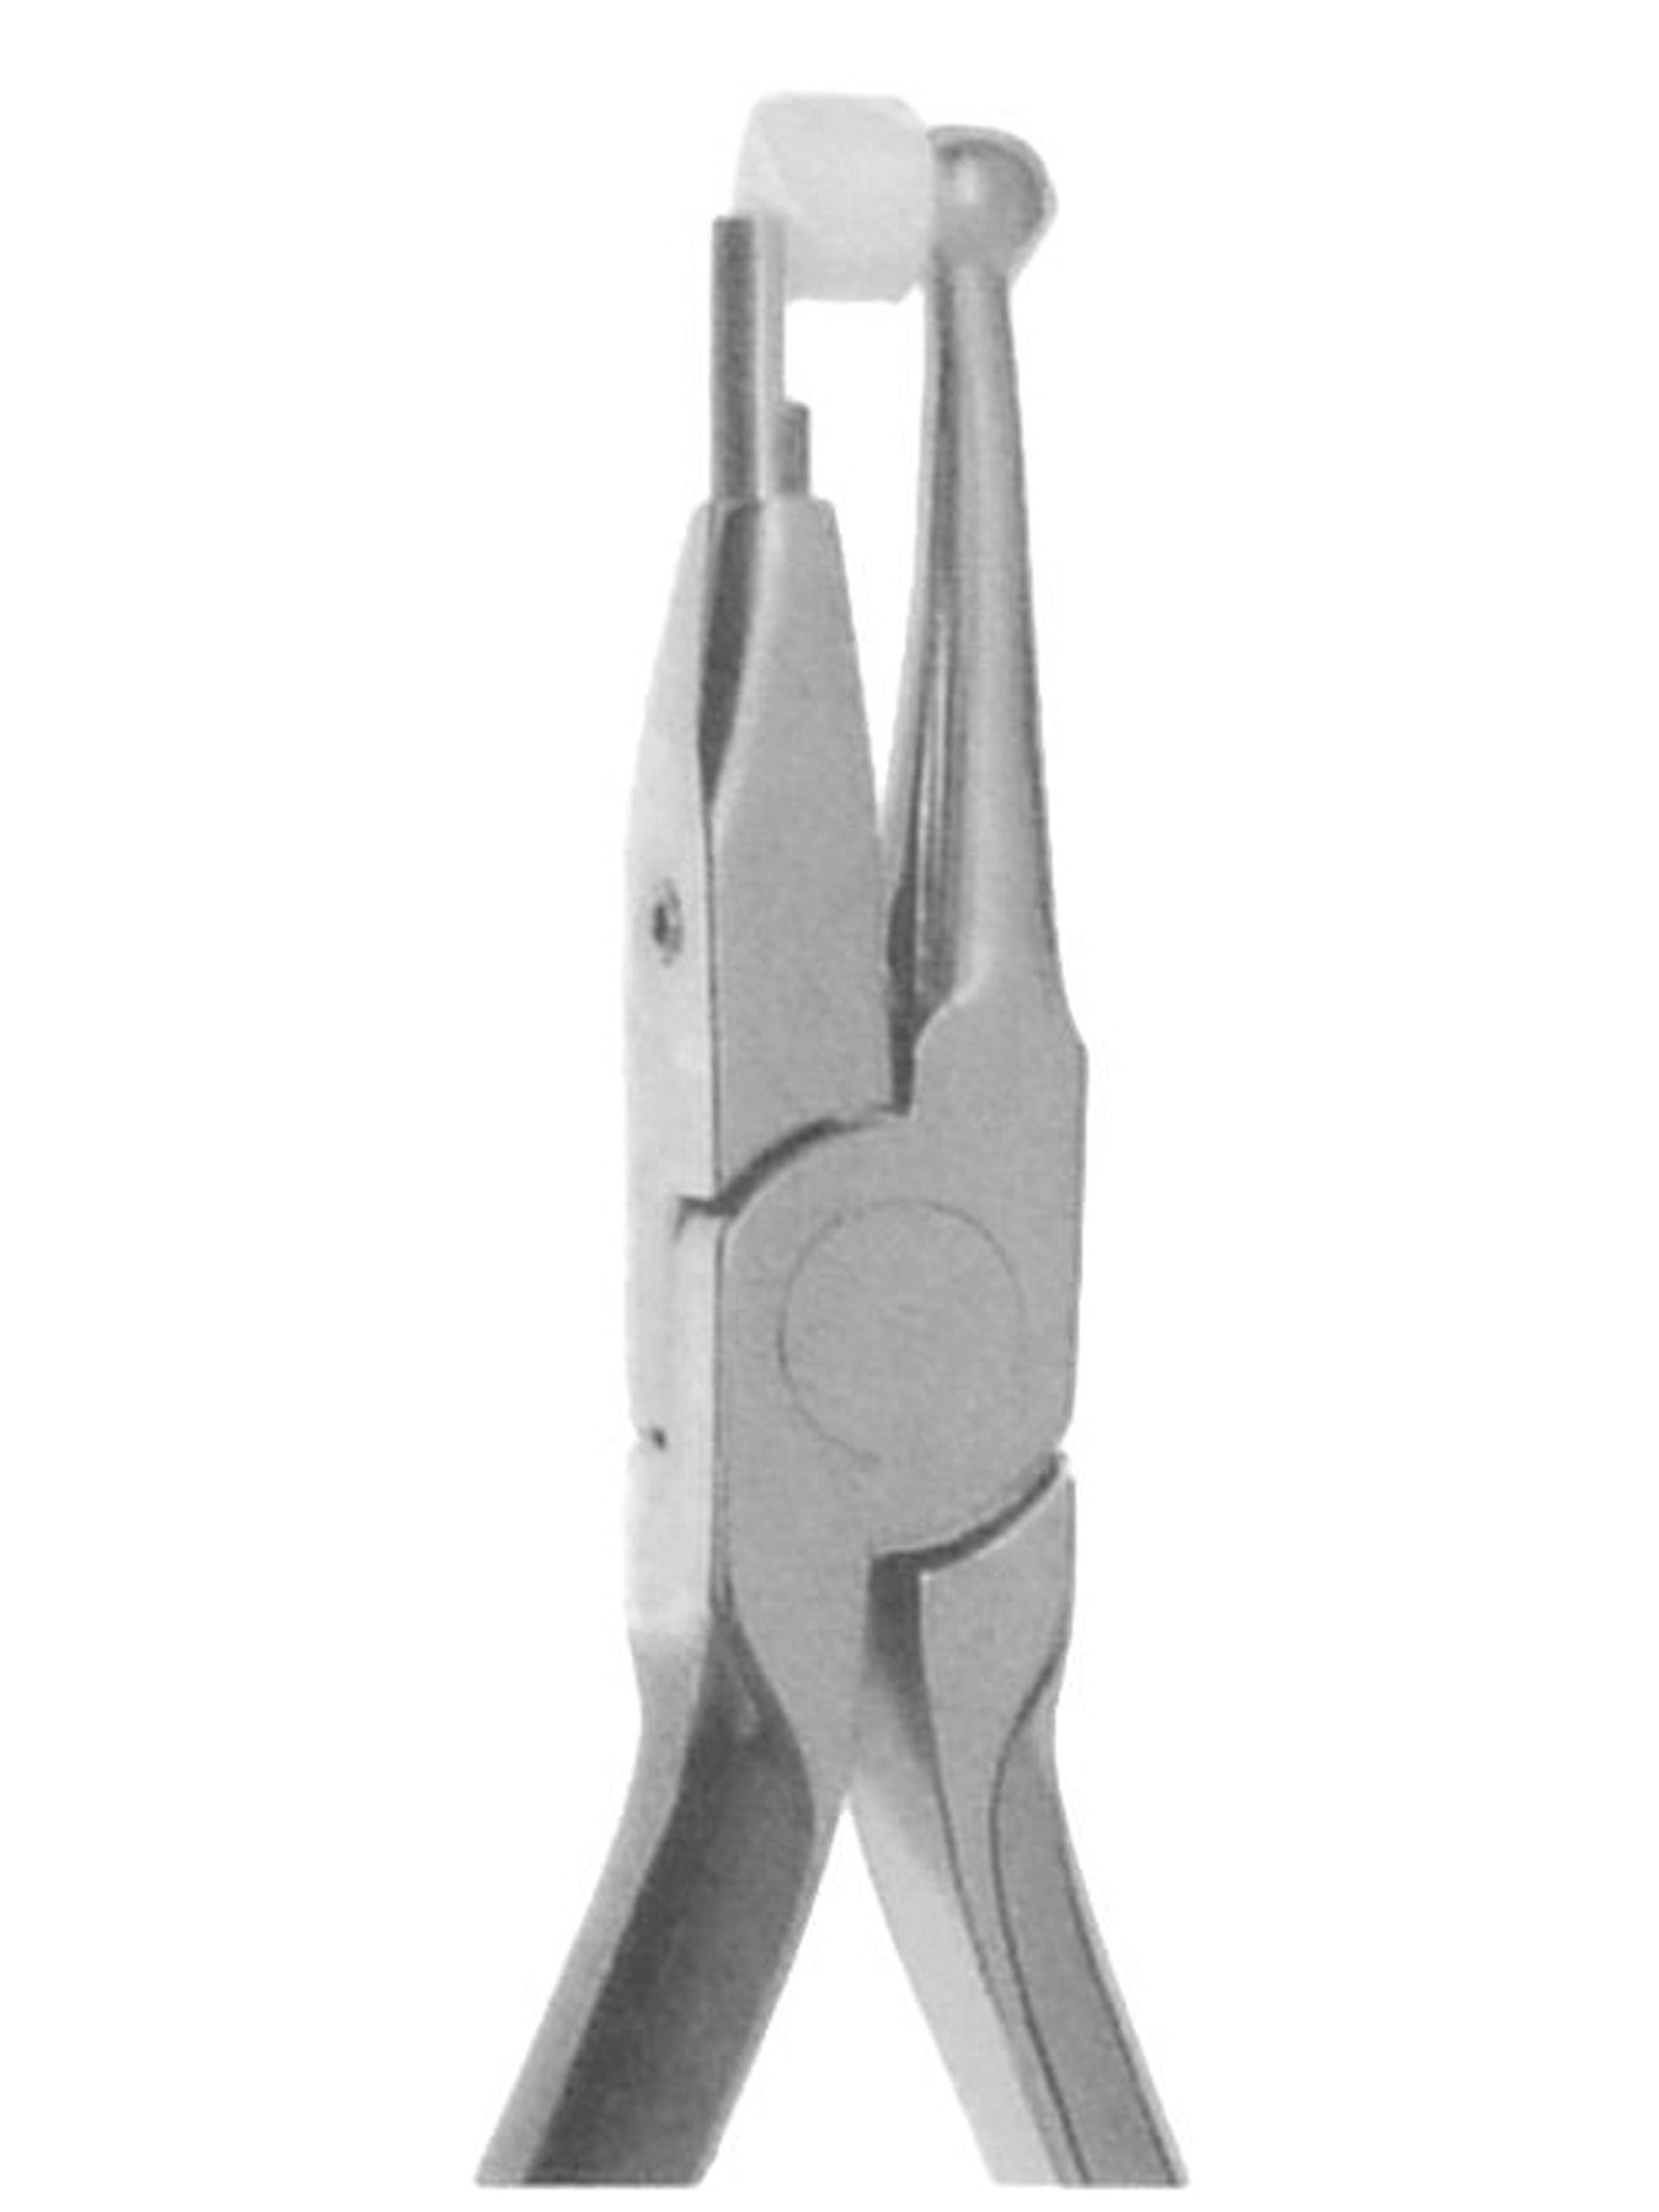 Orthodontic Pliers ,Direct Bonding Bracket And Band Removers